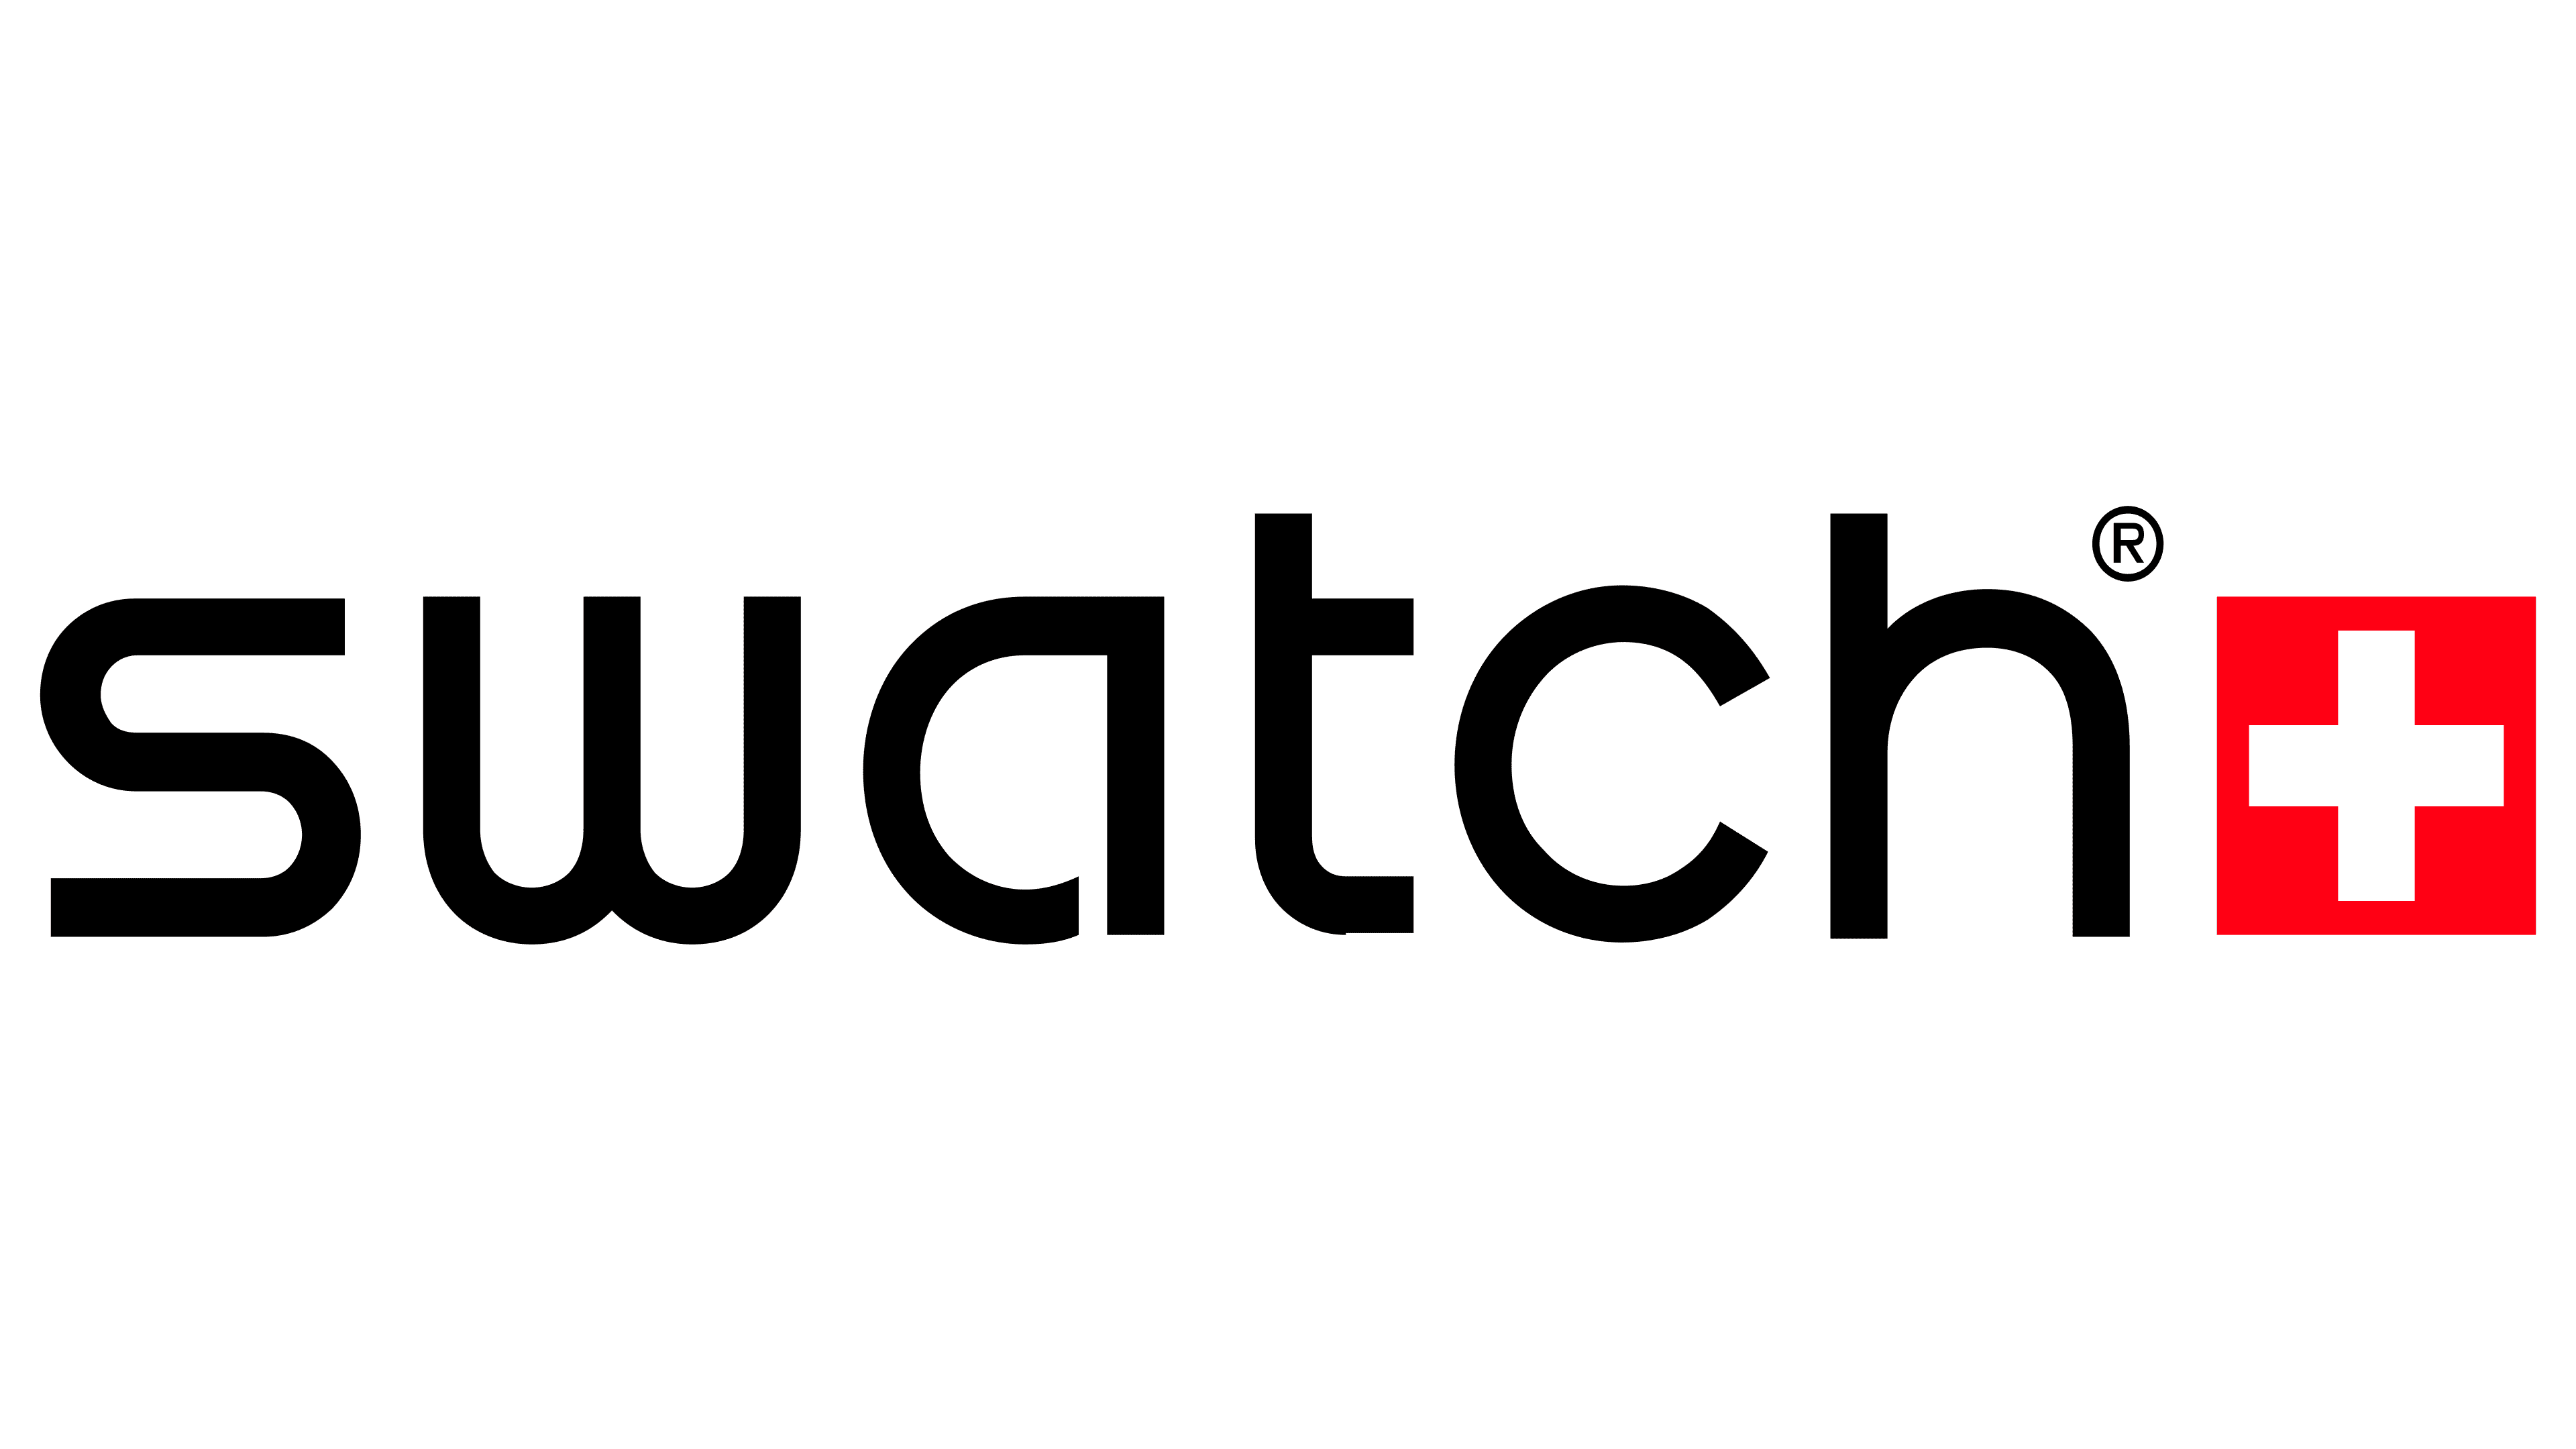 Swatch partners with the European Space Agency (ESA) - Swatch® Official site